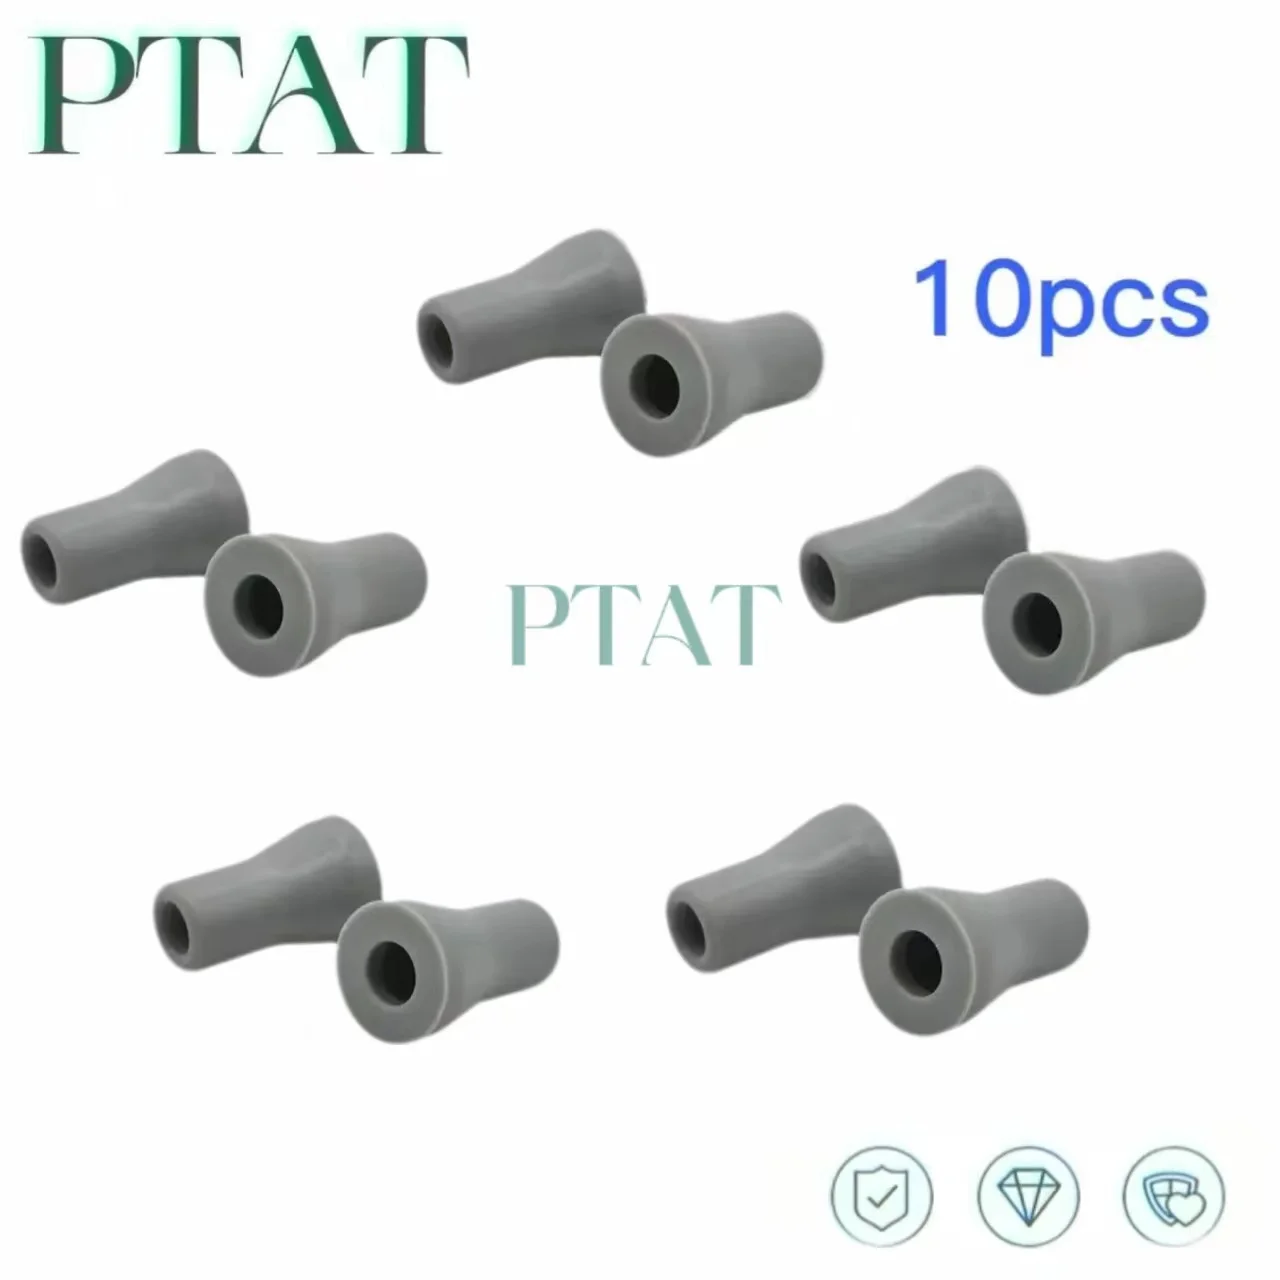 

10 Pcs Dental Saliva Ejector Weak Suction Rubber Snap Tip Adapter Replacement Dental Odontología Accesorios Dentistry